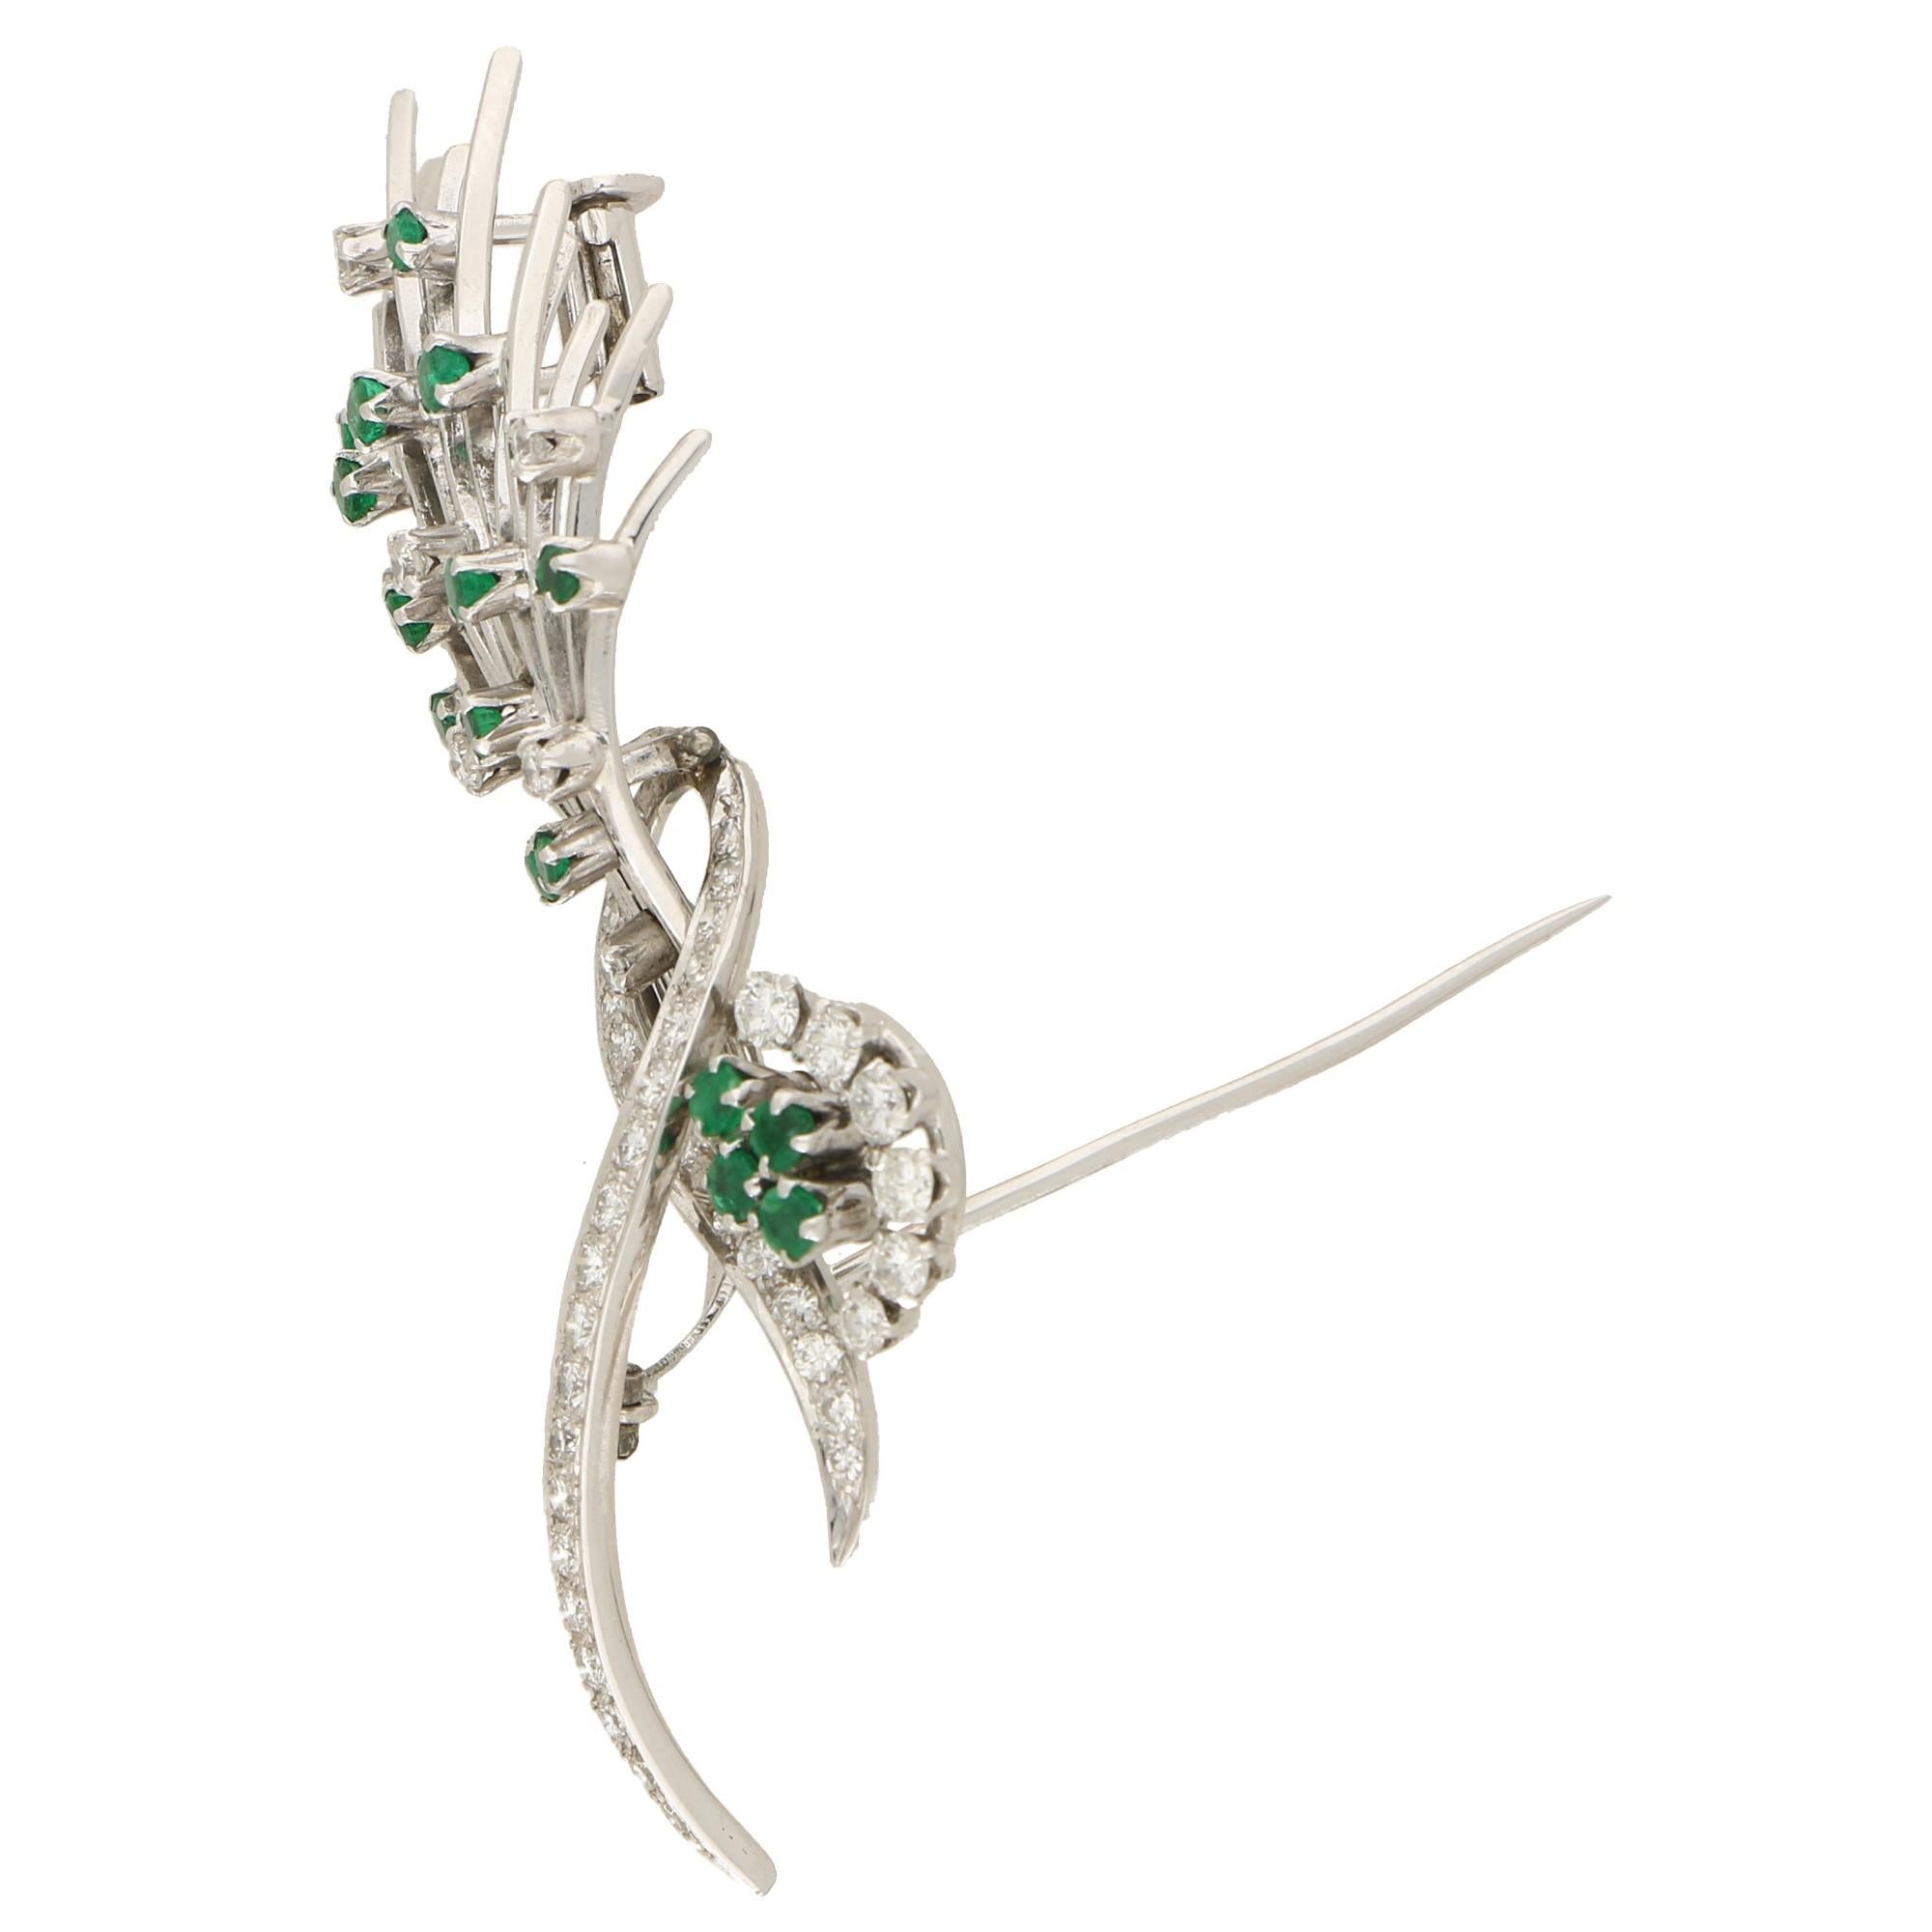 A beautiful vintage emerald and diamond floral spray brooch set in platinum. The brooch is estimated to be from the 1980's and is set with bright round cut emeralds and round brilliant cut diamonds. These stones are set amongst a floral spray of 15